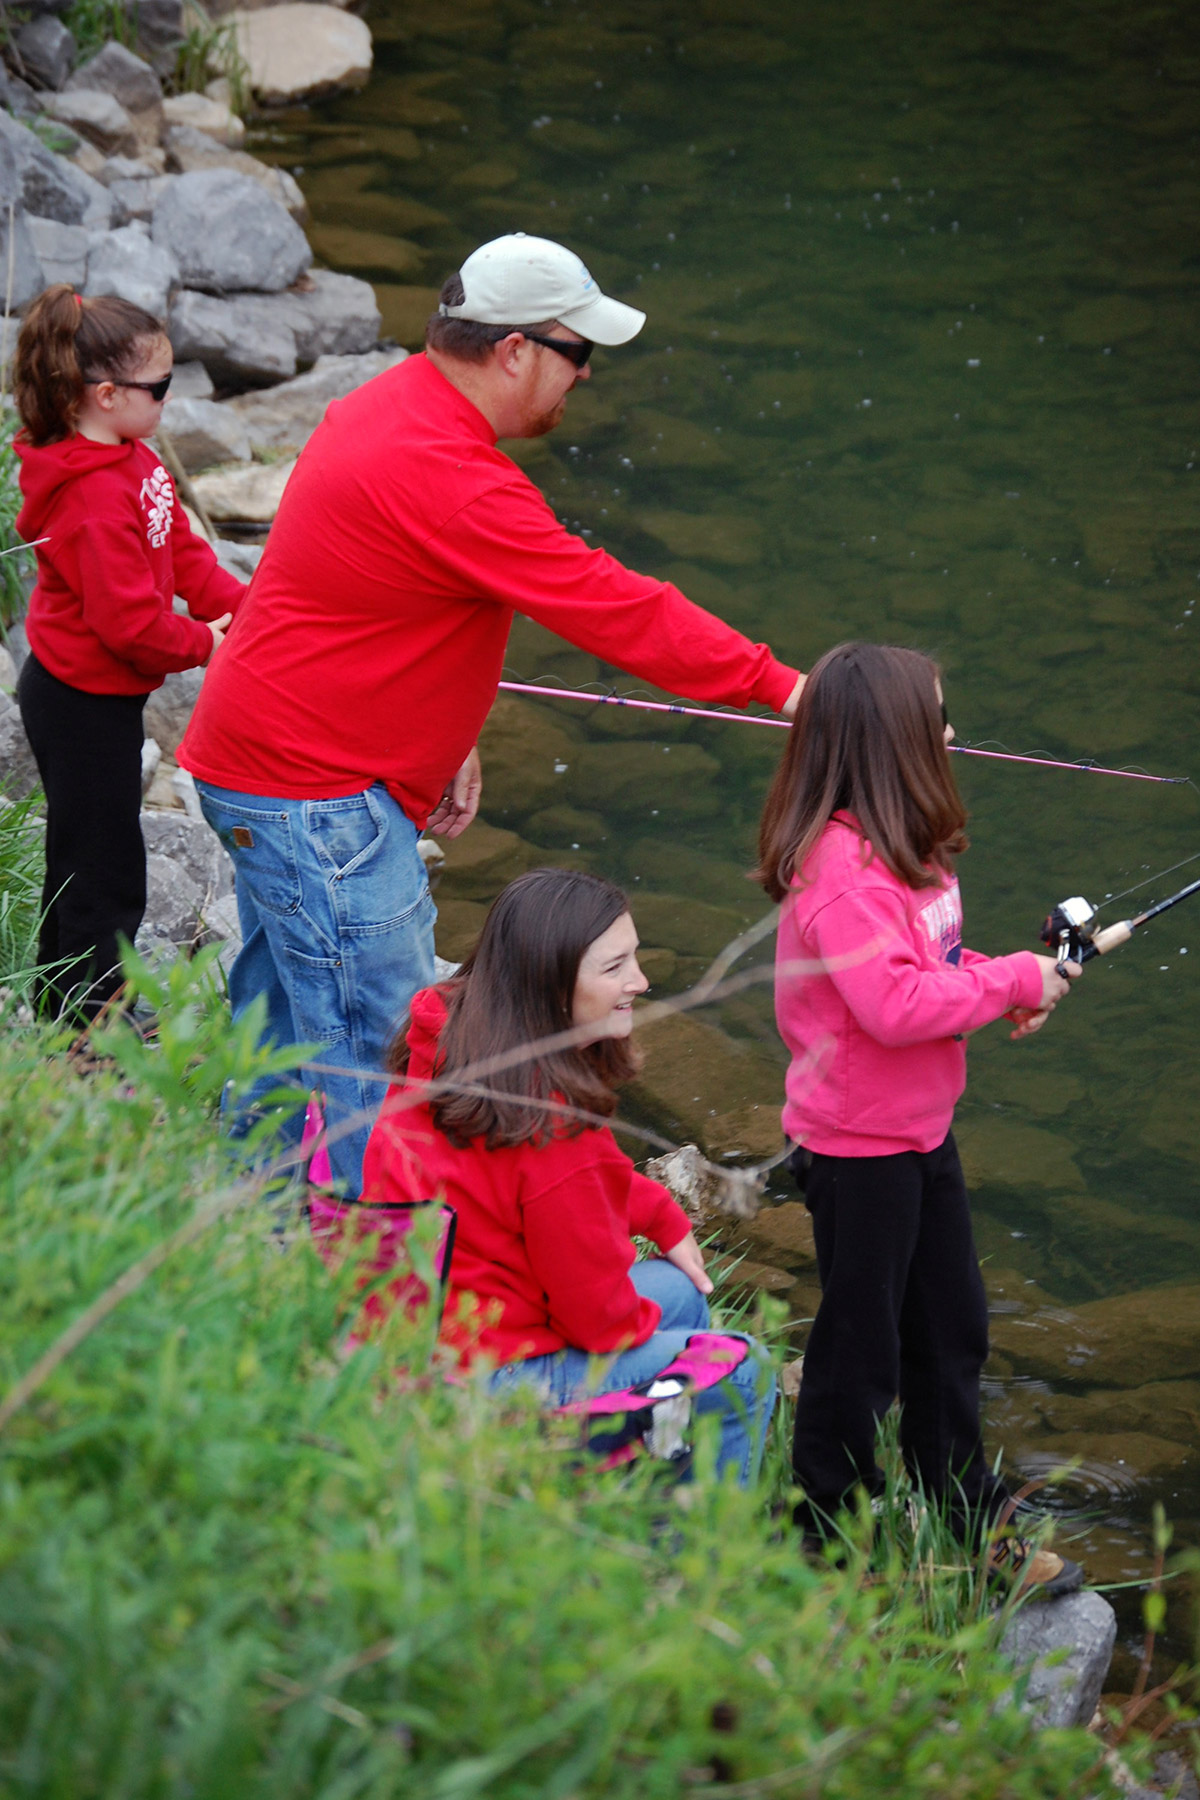 by Wikimedia Commons - VSP NT. Each spring Natural Tunnel State Park hosts a Kids Fishing Day at Stock Creek - AA - Author: Virginia State Parks staff - cutted